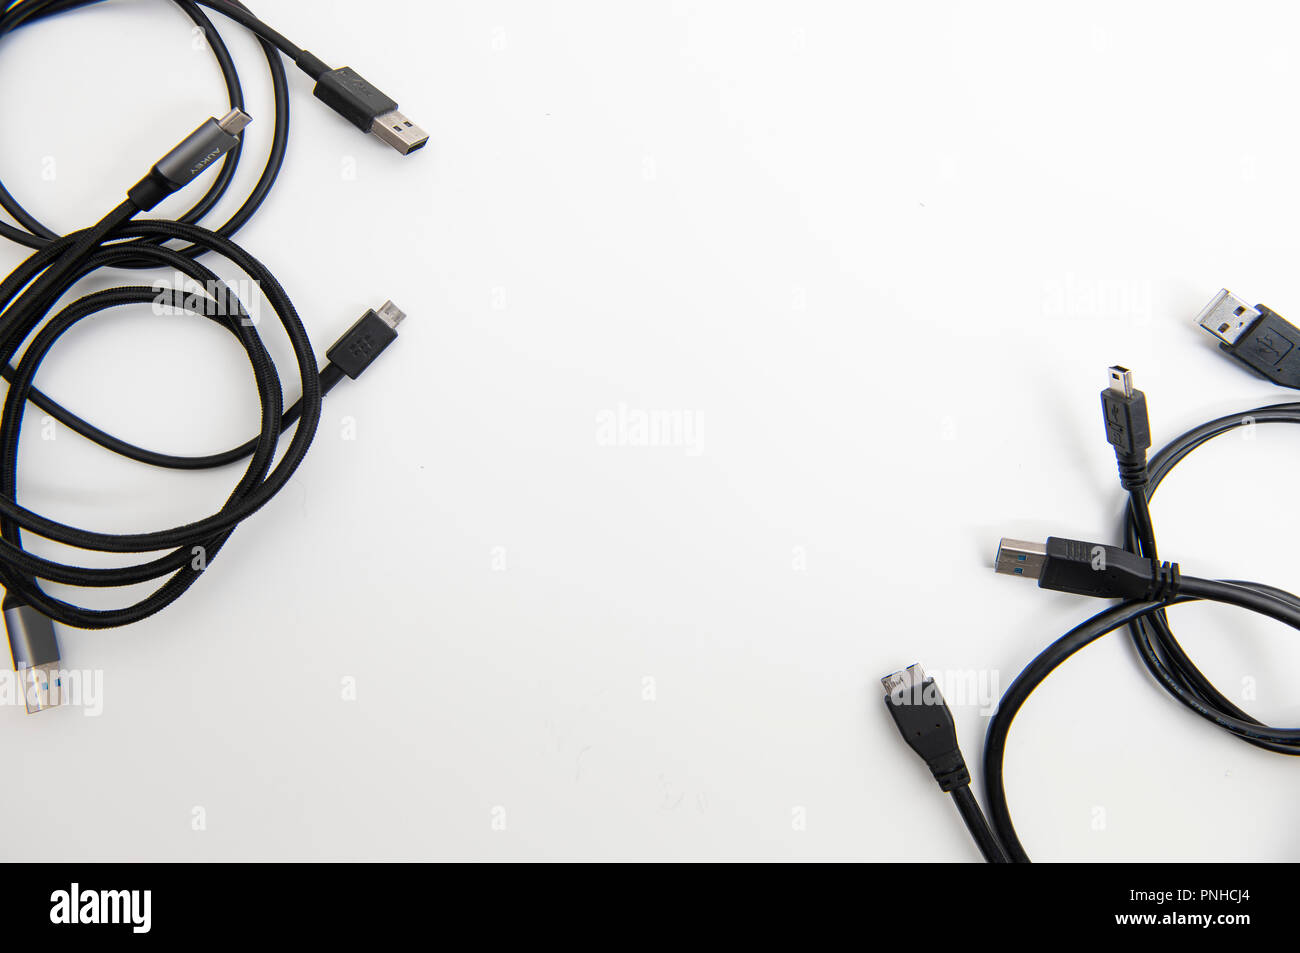 White desk with various USB cables. Stock Photo